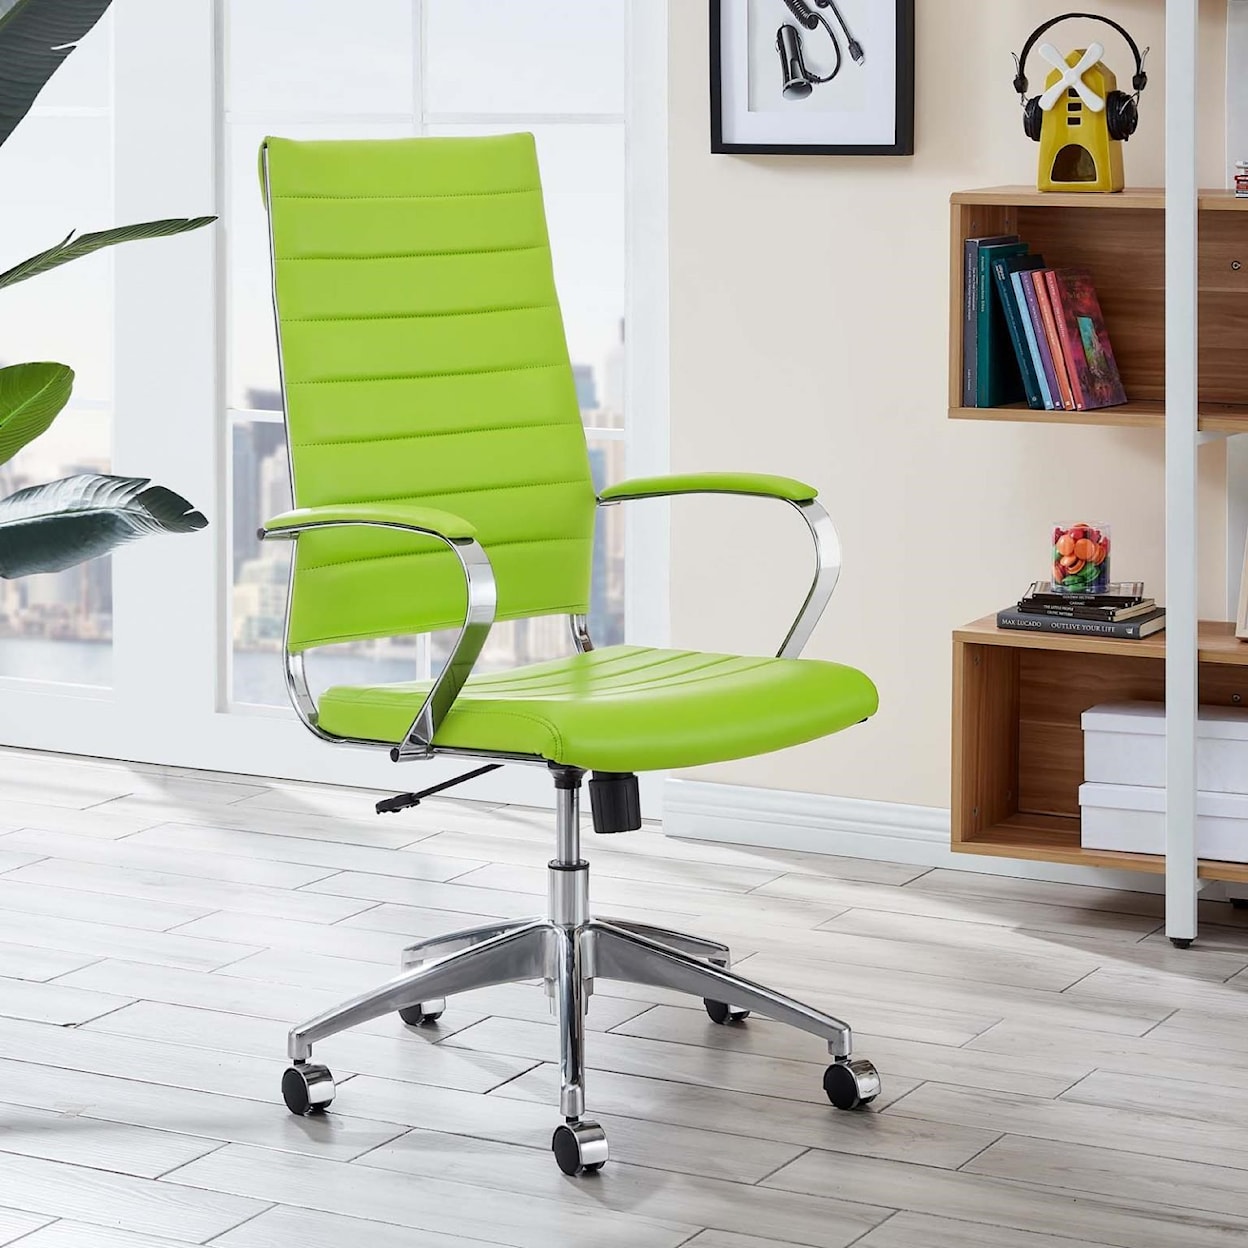 Modway Home Office Jive Highback Office Chair In Bright Green